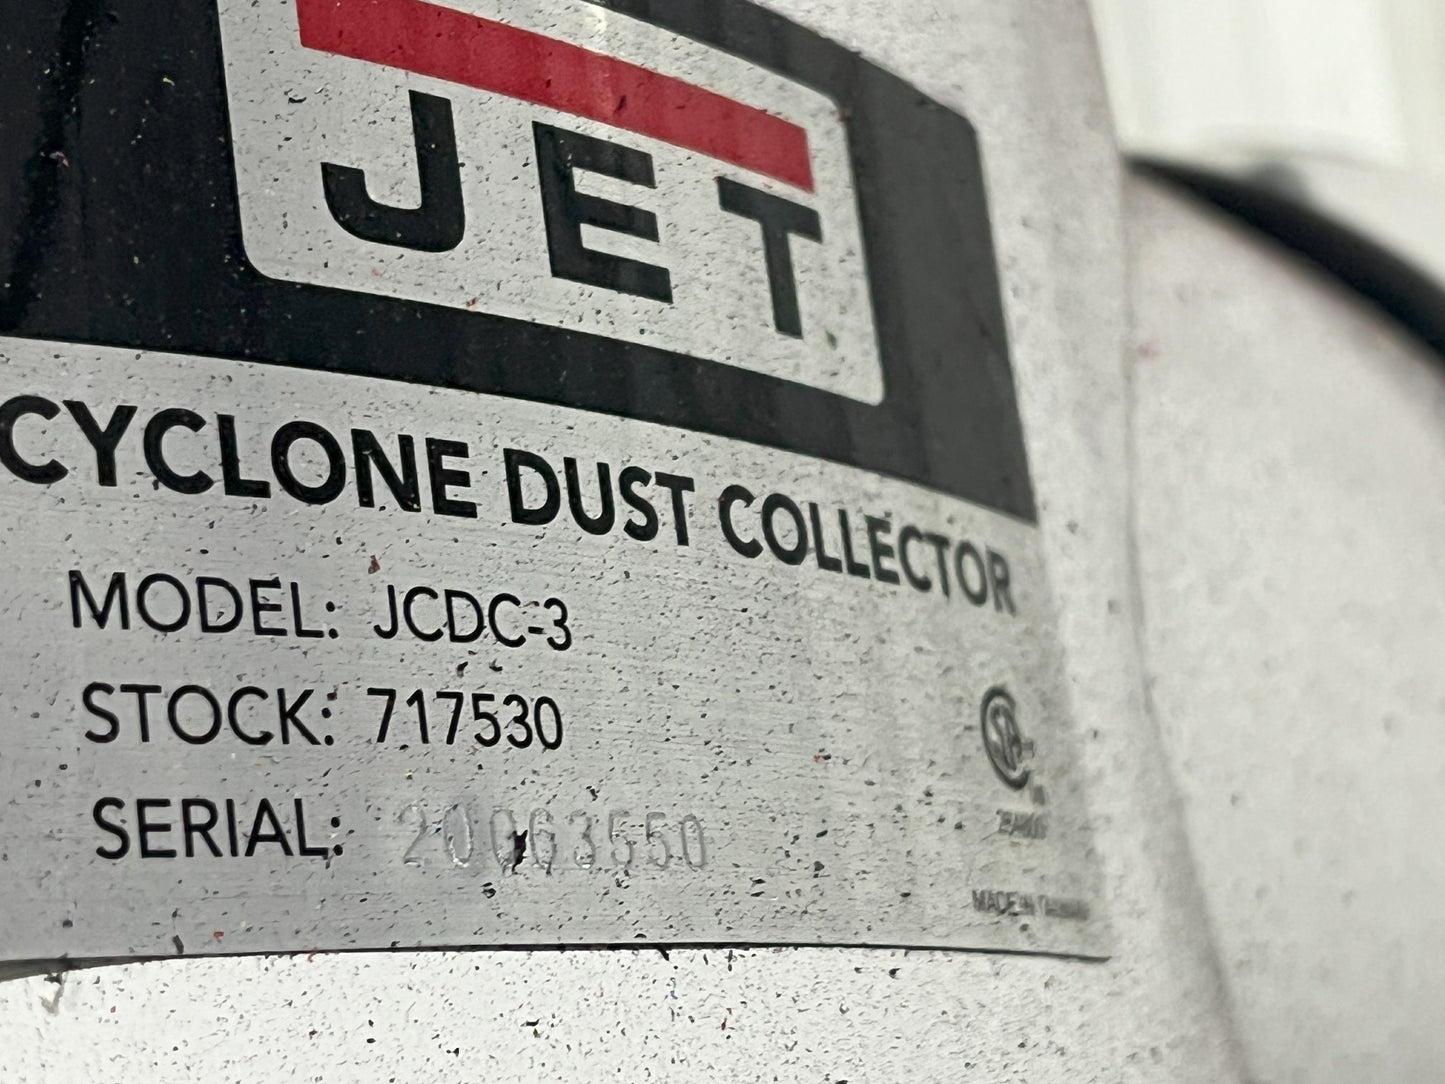 JET DUST COLLECTOR MODEL JCDC-3 (S/N 20063550)